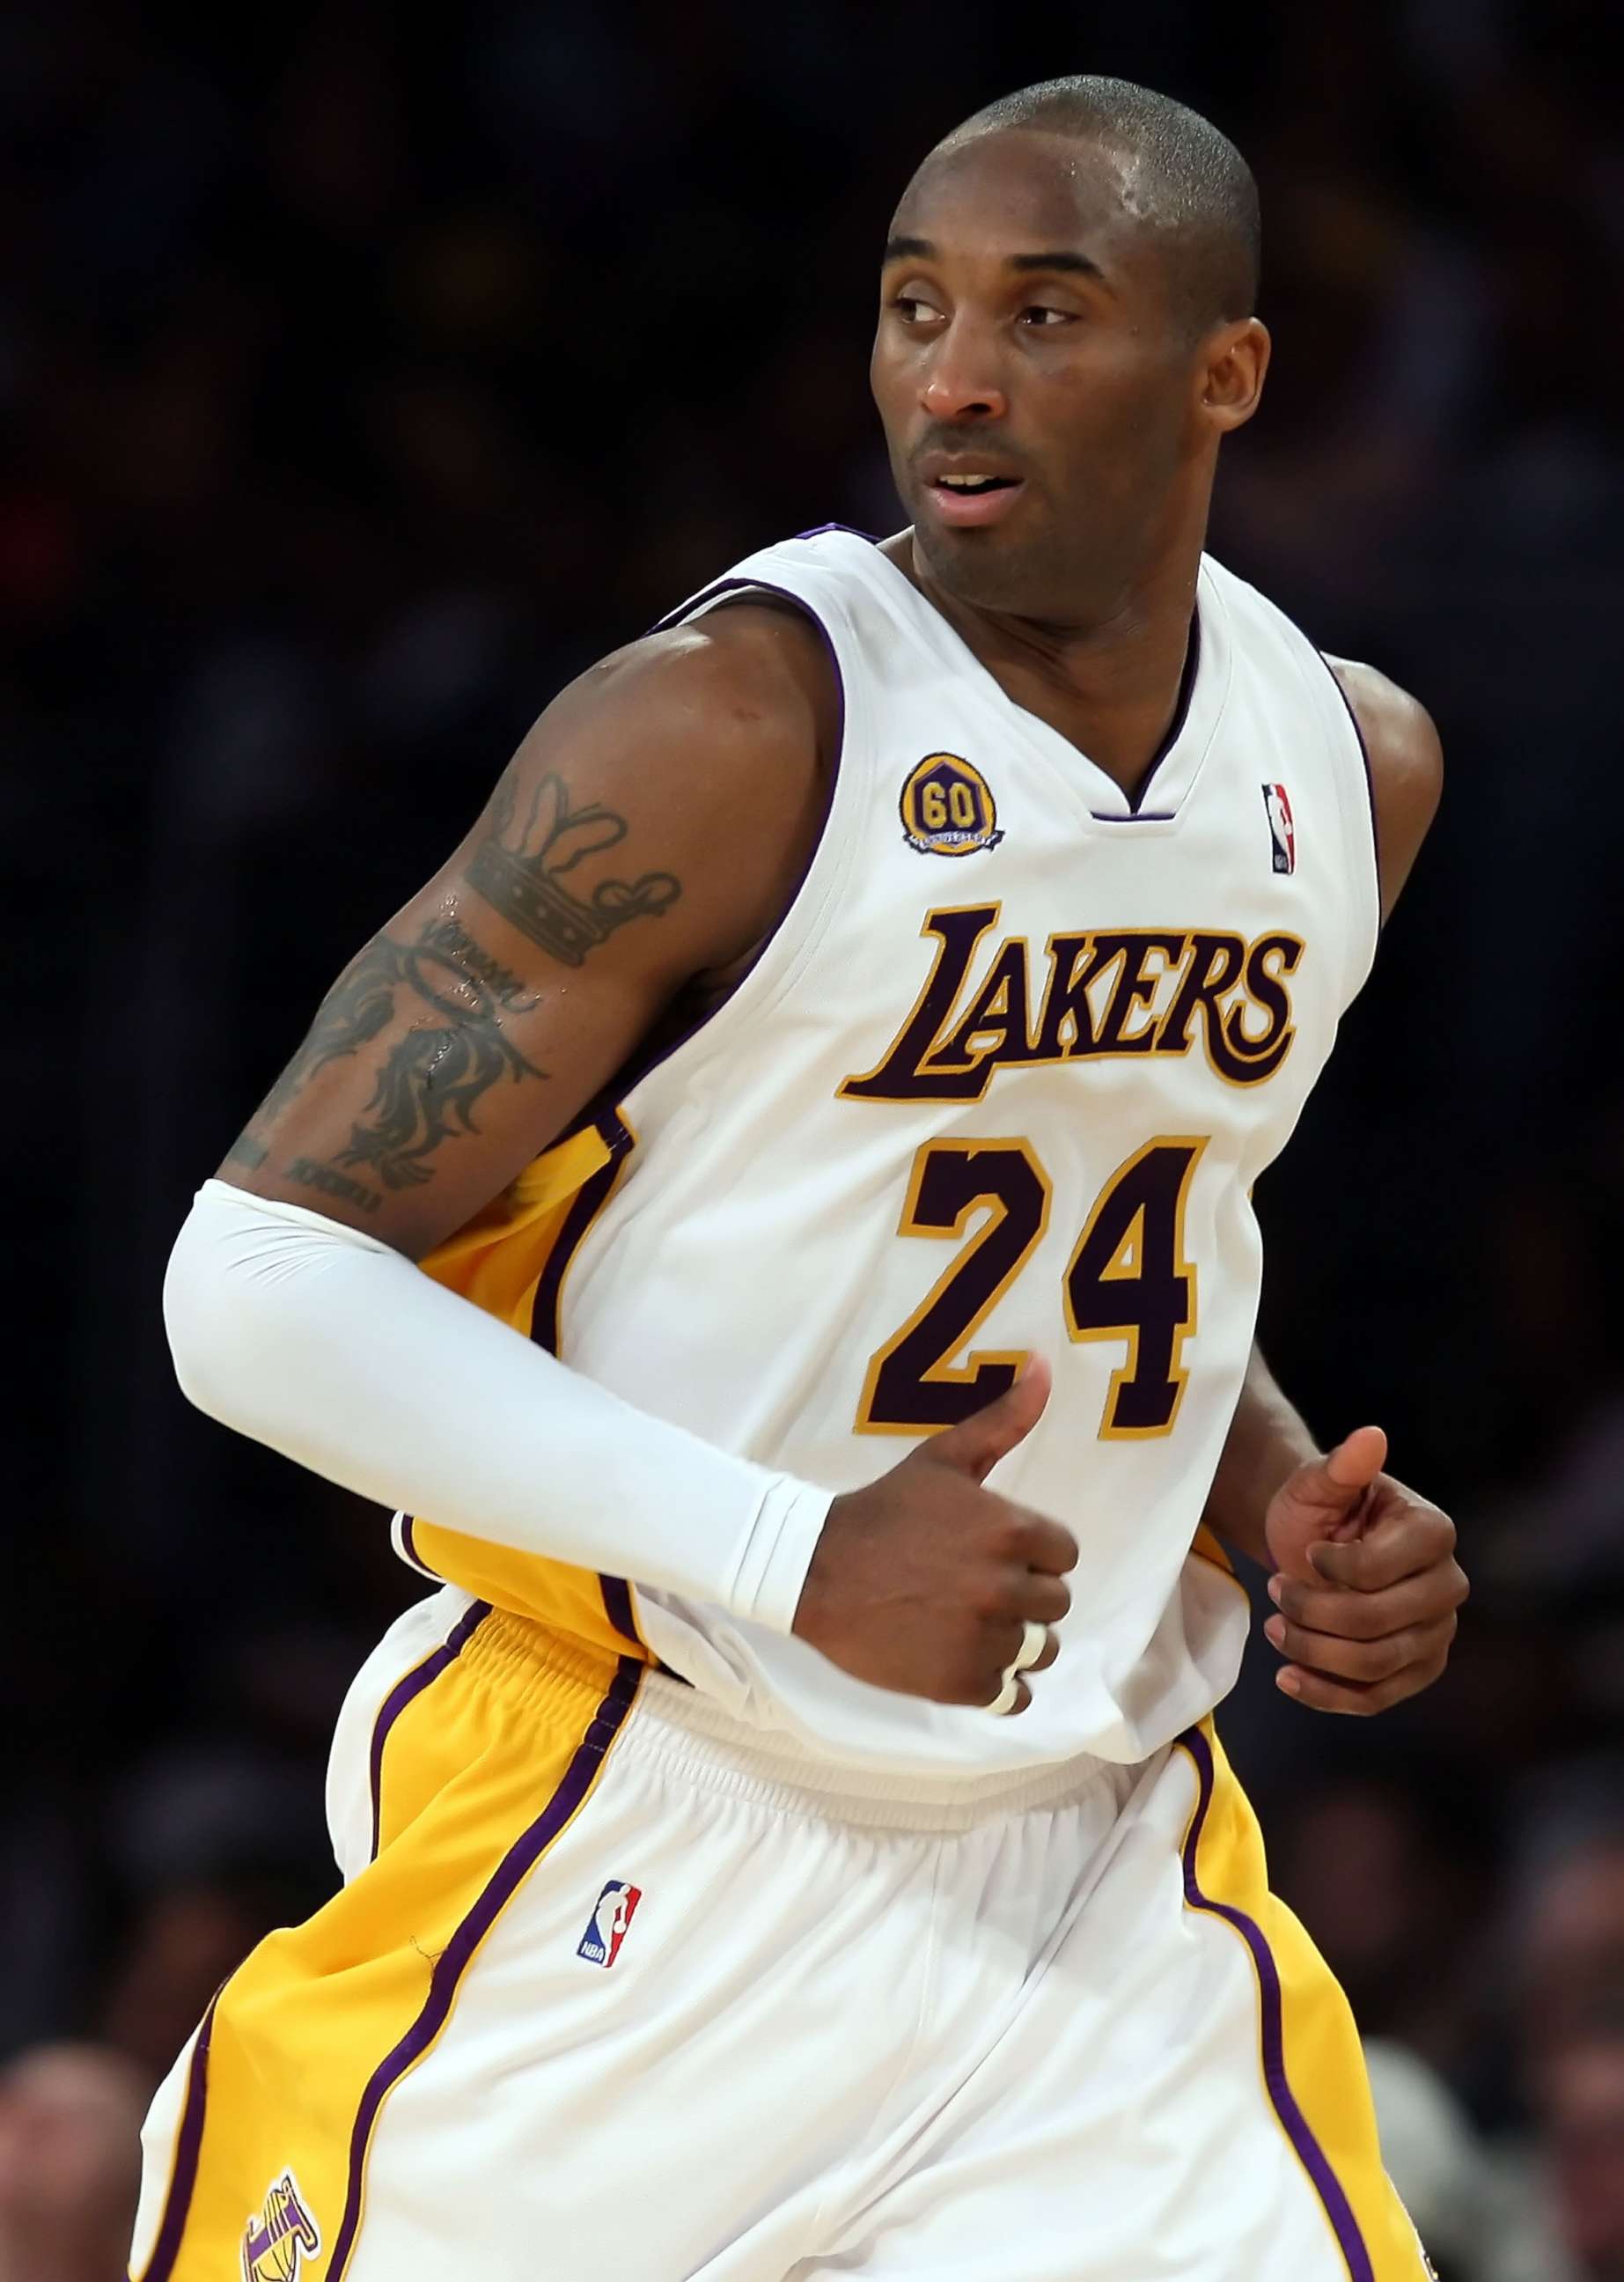 PHOTO: File photo: Kobe Bryant of the Los Angeles Lakers runs up court during the second quarter against the Denver Nuggets during the 2008 NBA Playoffs at Staples Center on April 20, 2008 in Los Angeles, Lakers.